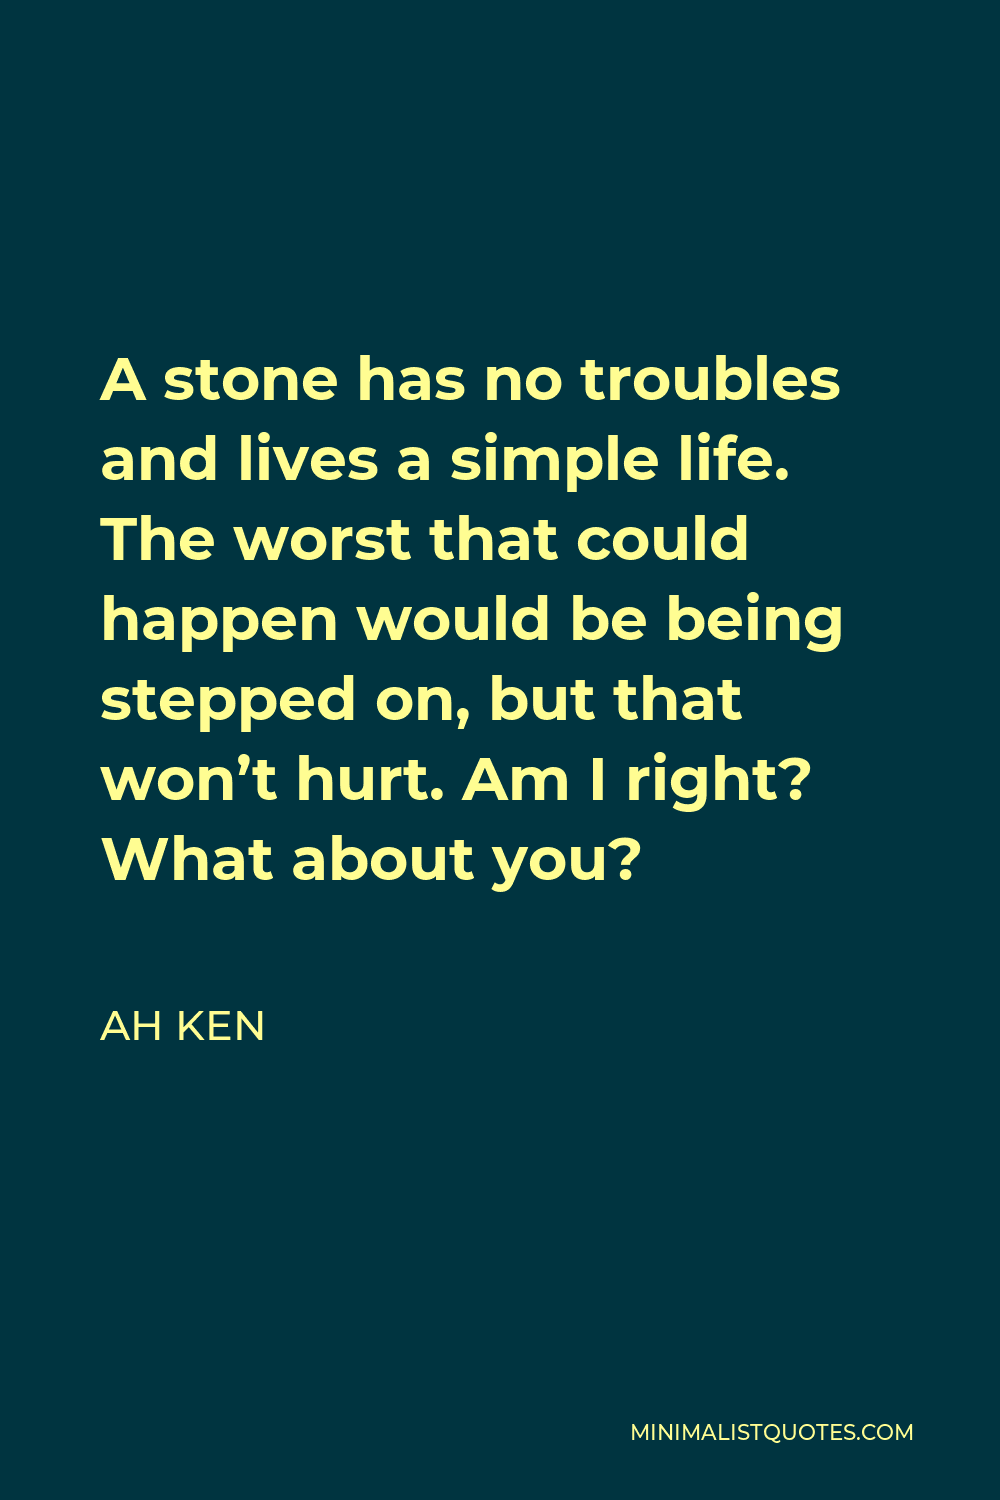 Ah Ken Quote - A stone has no troubles and lives a simple life. The worst that could happen would be being stepped on, but that won’t hurt. Am I right? What about you?